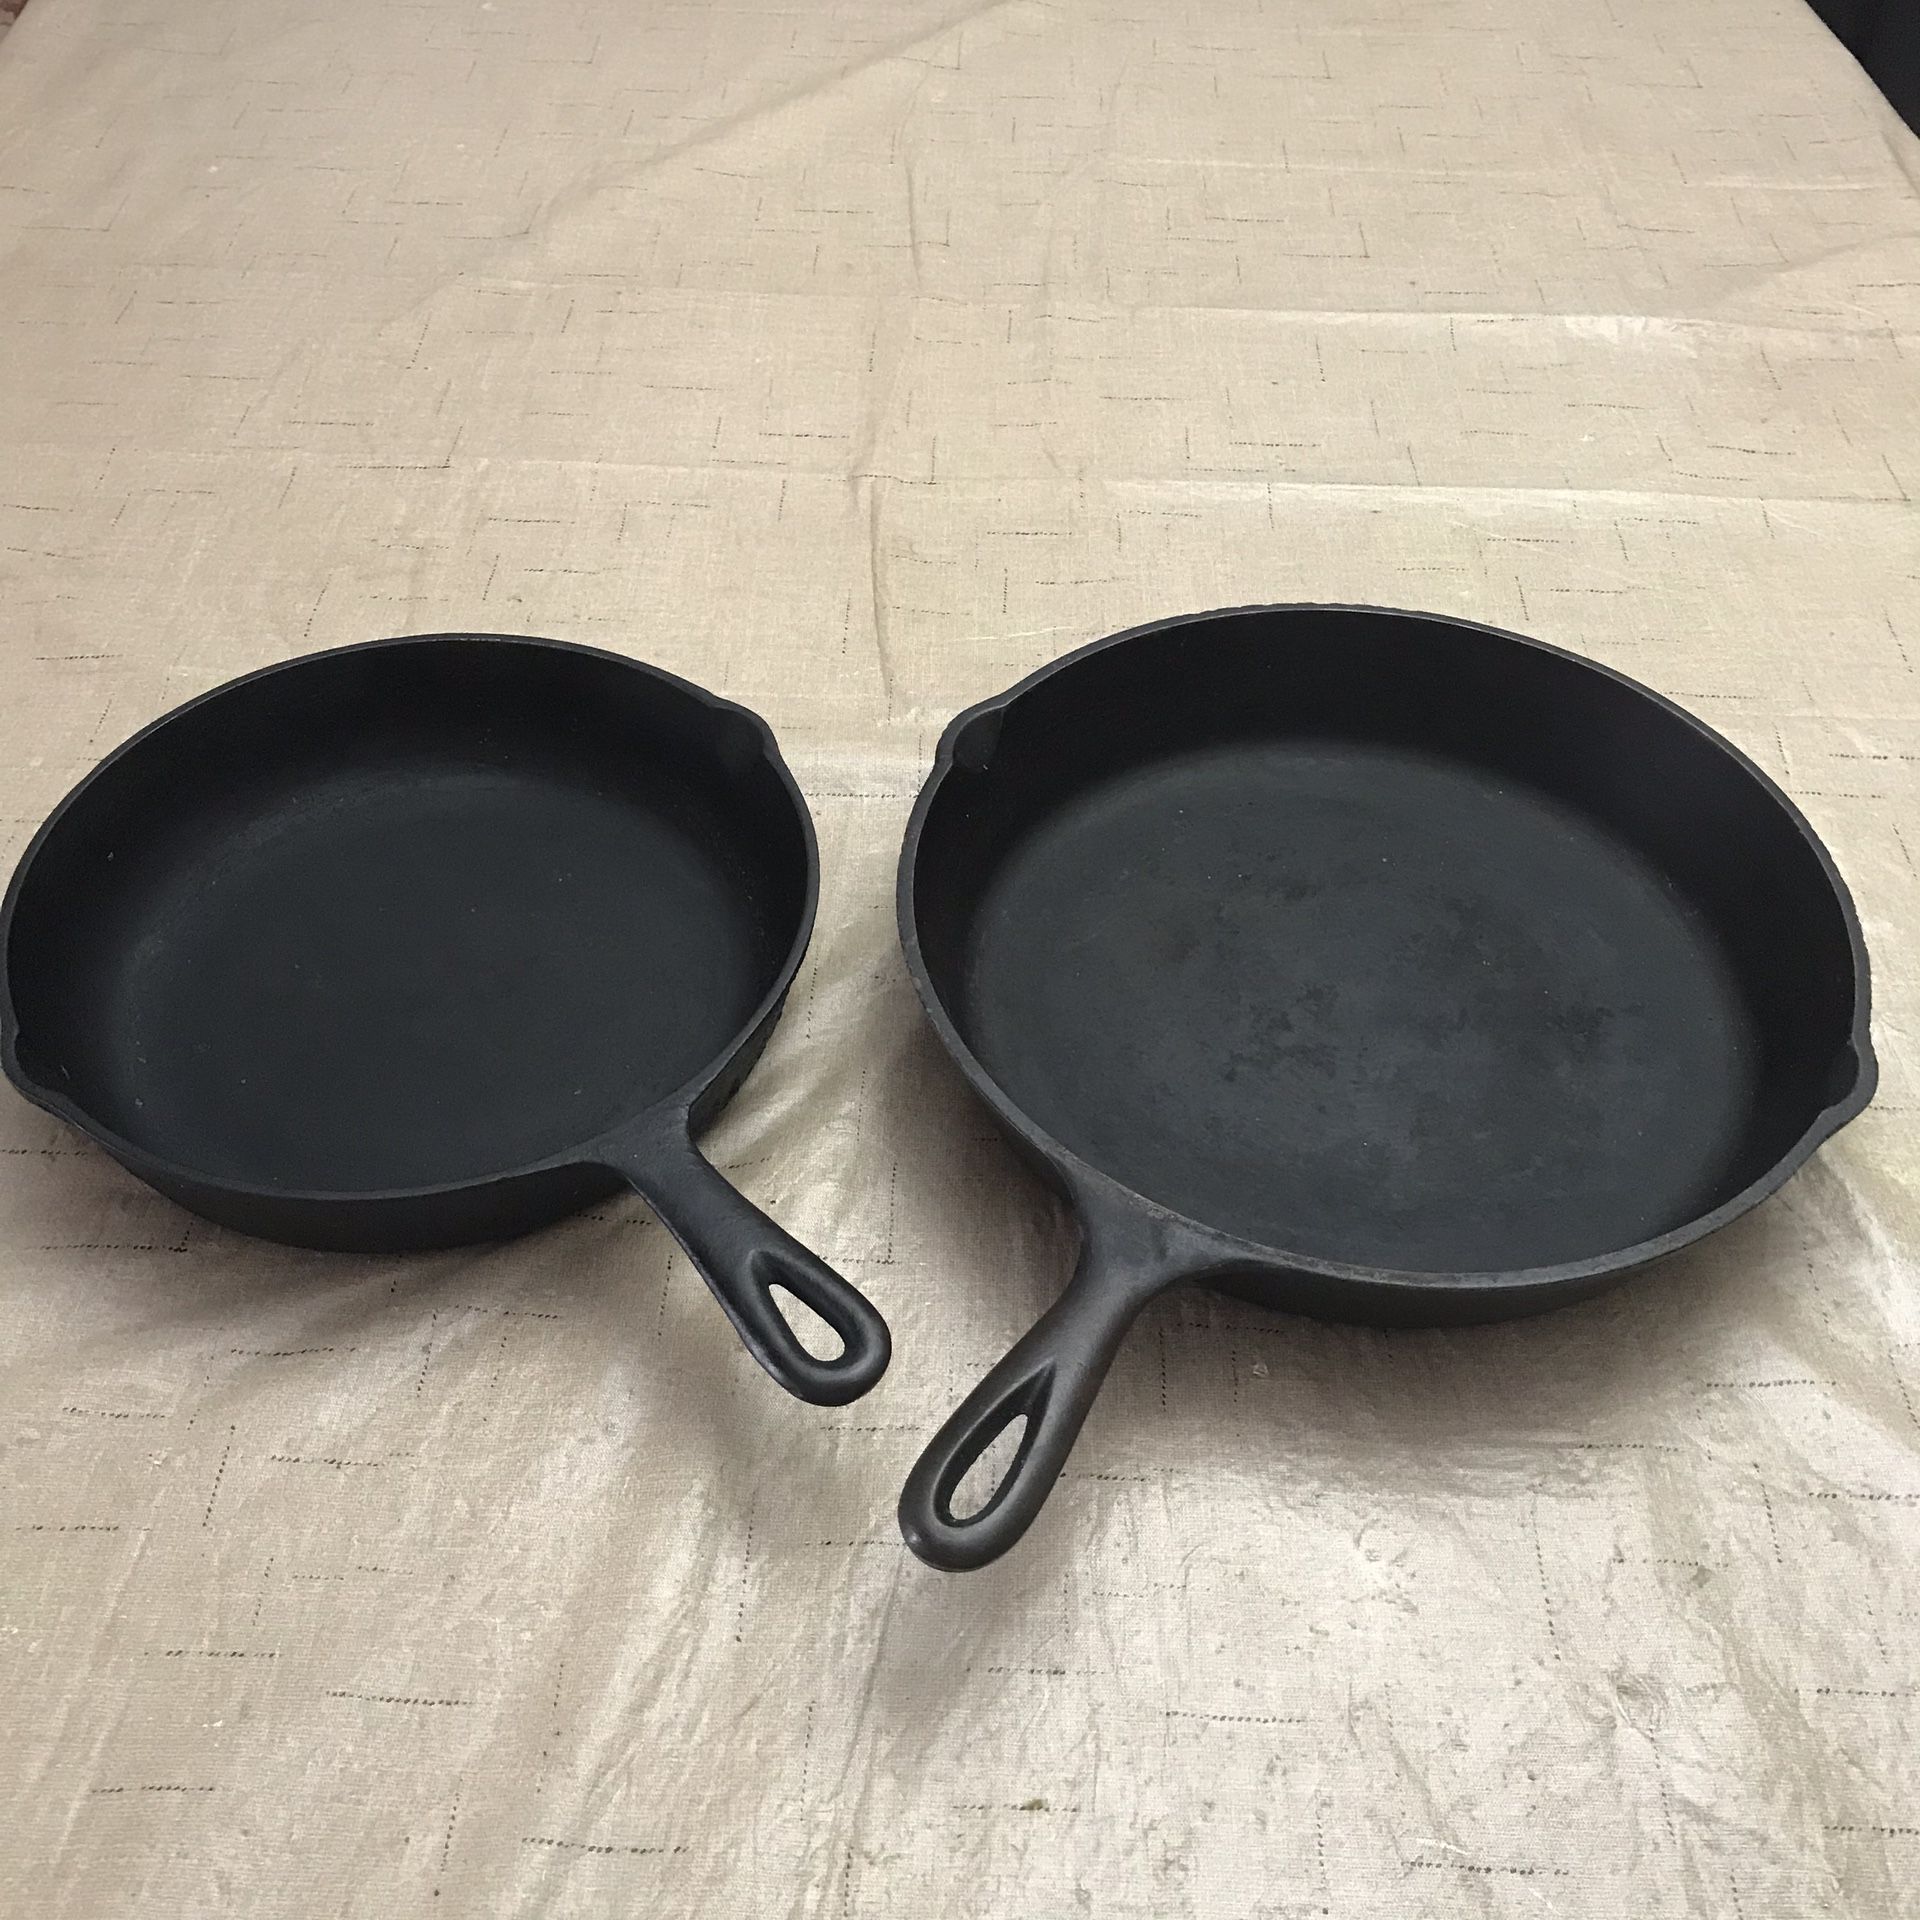 Vintage Cast Iron Frying Pans #10 and #7 Seasoned ready to cook, and in excellent Condition